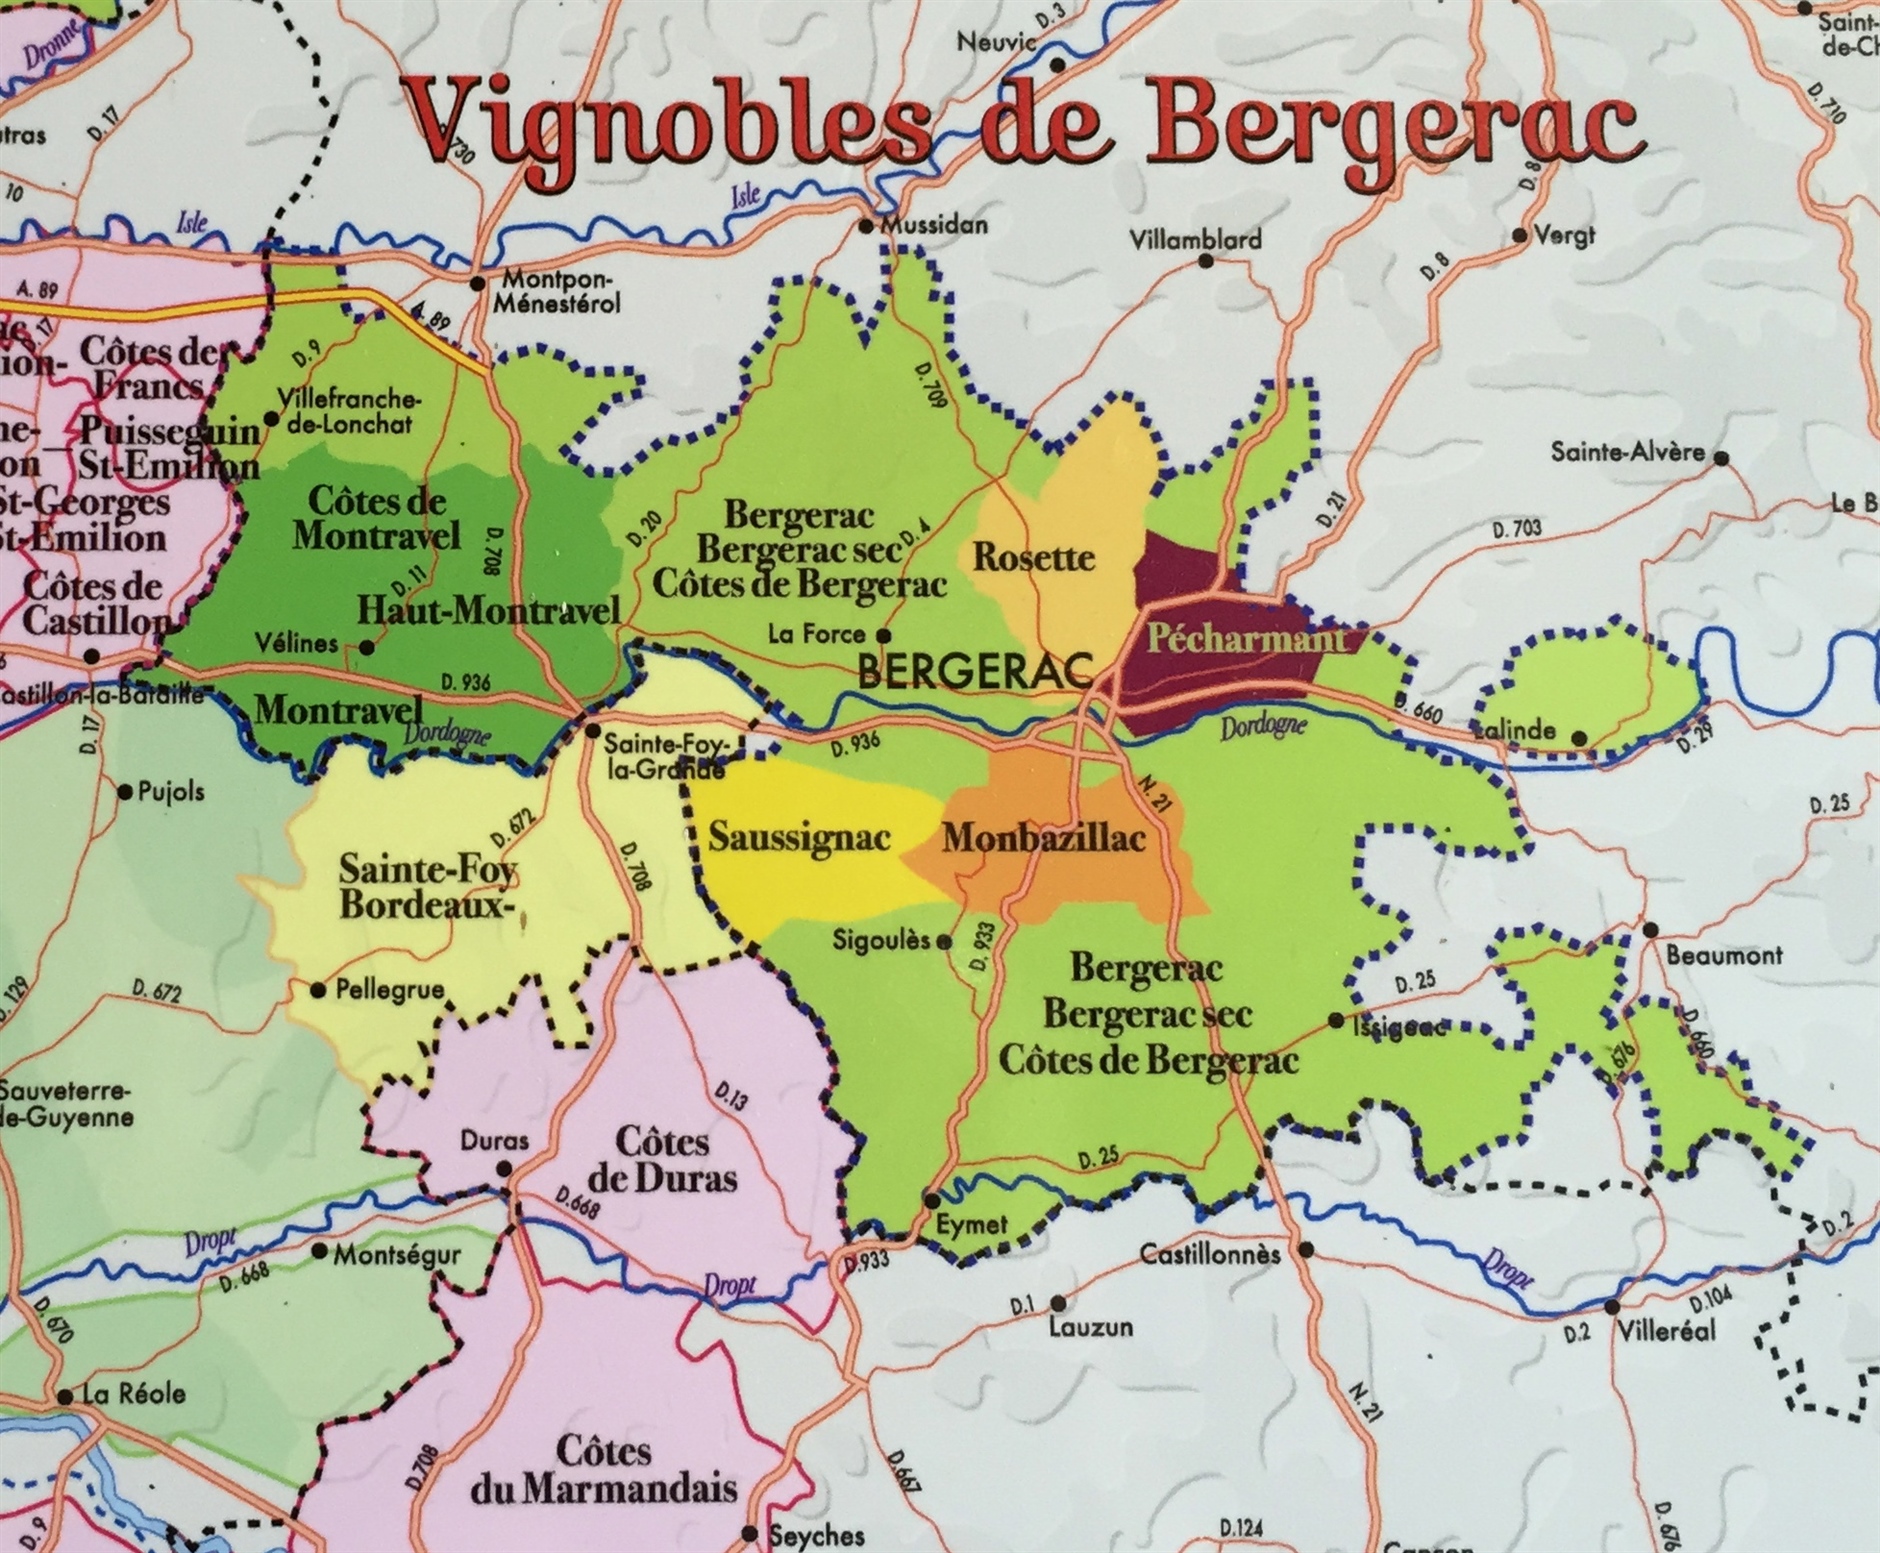 Beyond Bordeaux Articles - - Bergerac Feature Charles International - From to Satellites: Neal GuildSomm Gascony